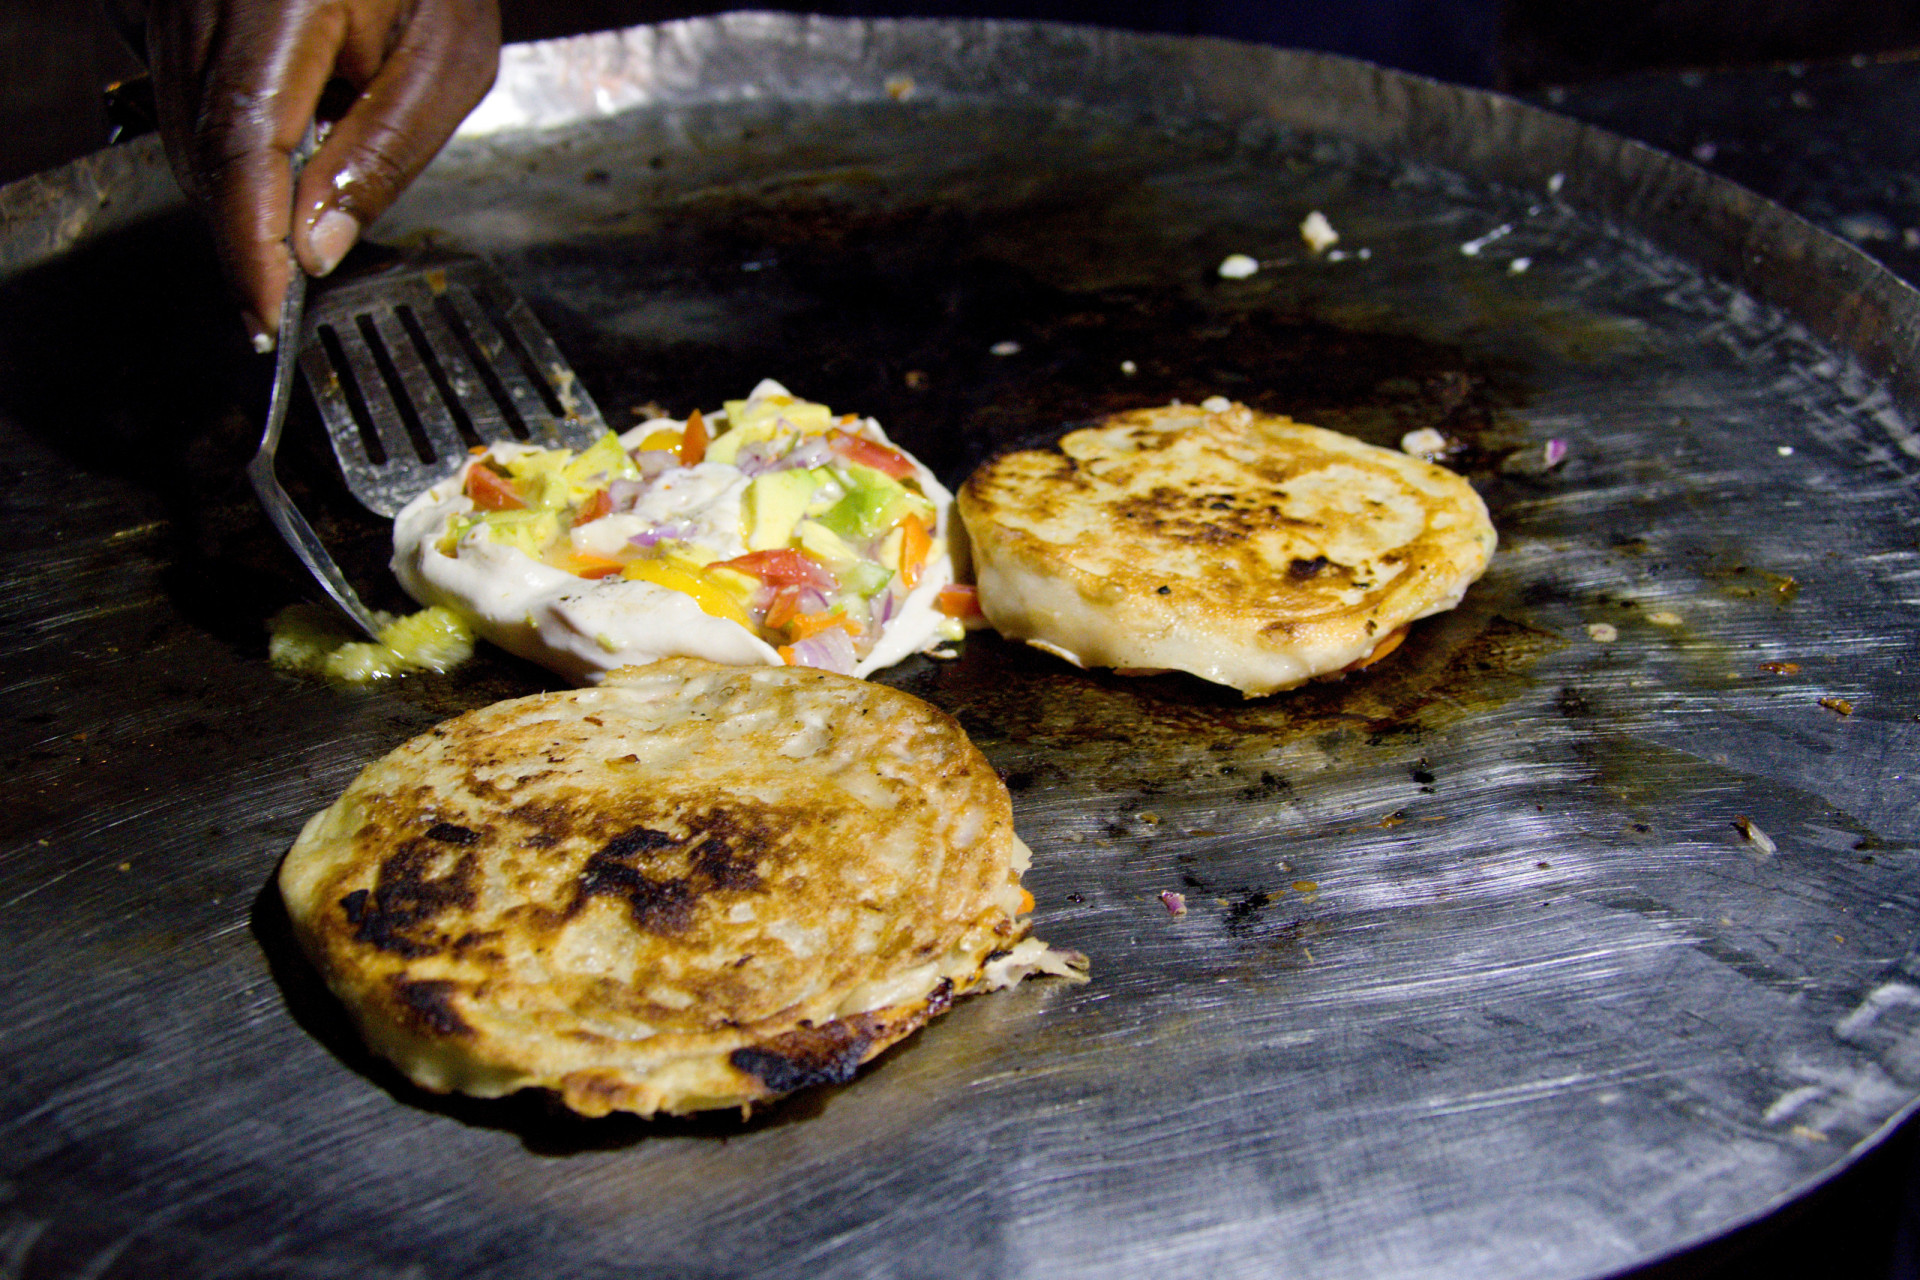 <p>Zanzibar pizzas are not pizzas as you know them. Instead, they resemble stuffed pancakes, filled with meat, vegetables, or even chocolate and banana if you'd prefer something sweet.</p><p><a href="https://www.msn.com/en-us/community/channel/vid-7xx8mnucu55yw63we9va2gwr7uihbxwc68fxqp25x6tg4ftibpra?cvid=94631541bc0f4f89bfd59158d696ad7e">Follow us and access great exclusive content every day</a></p>